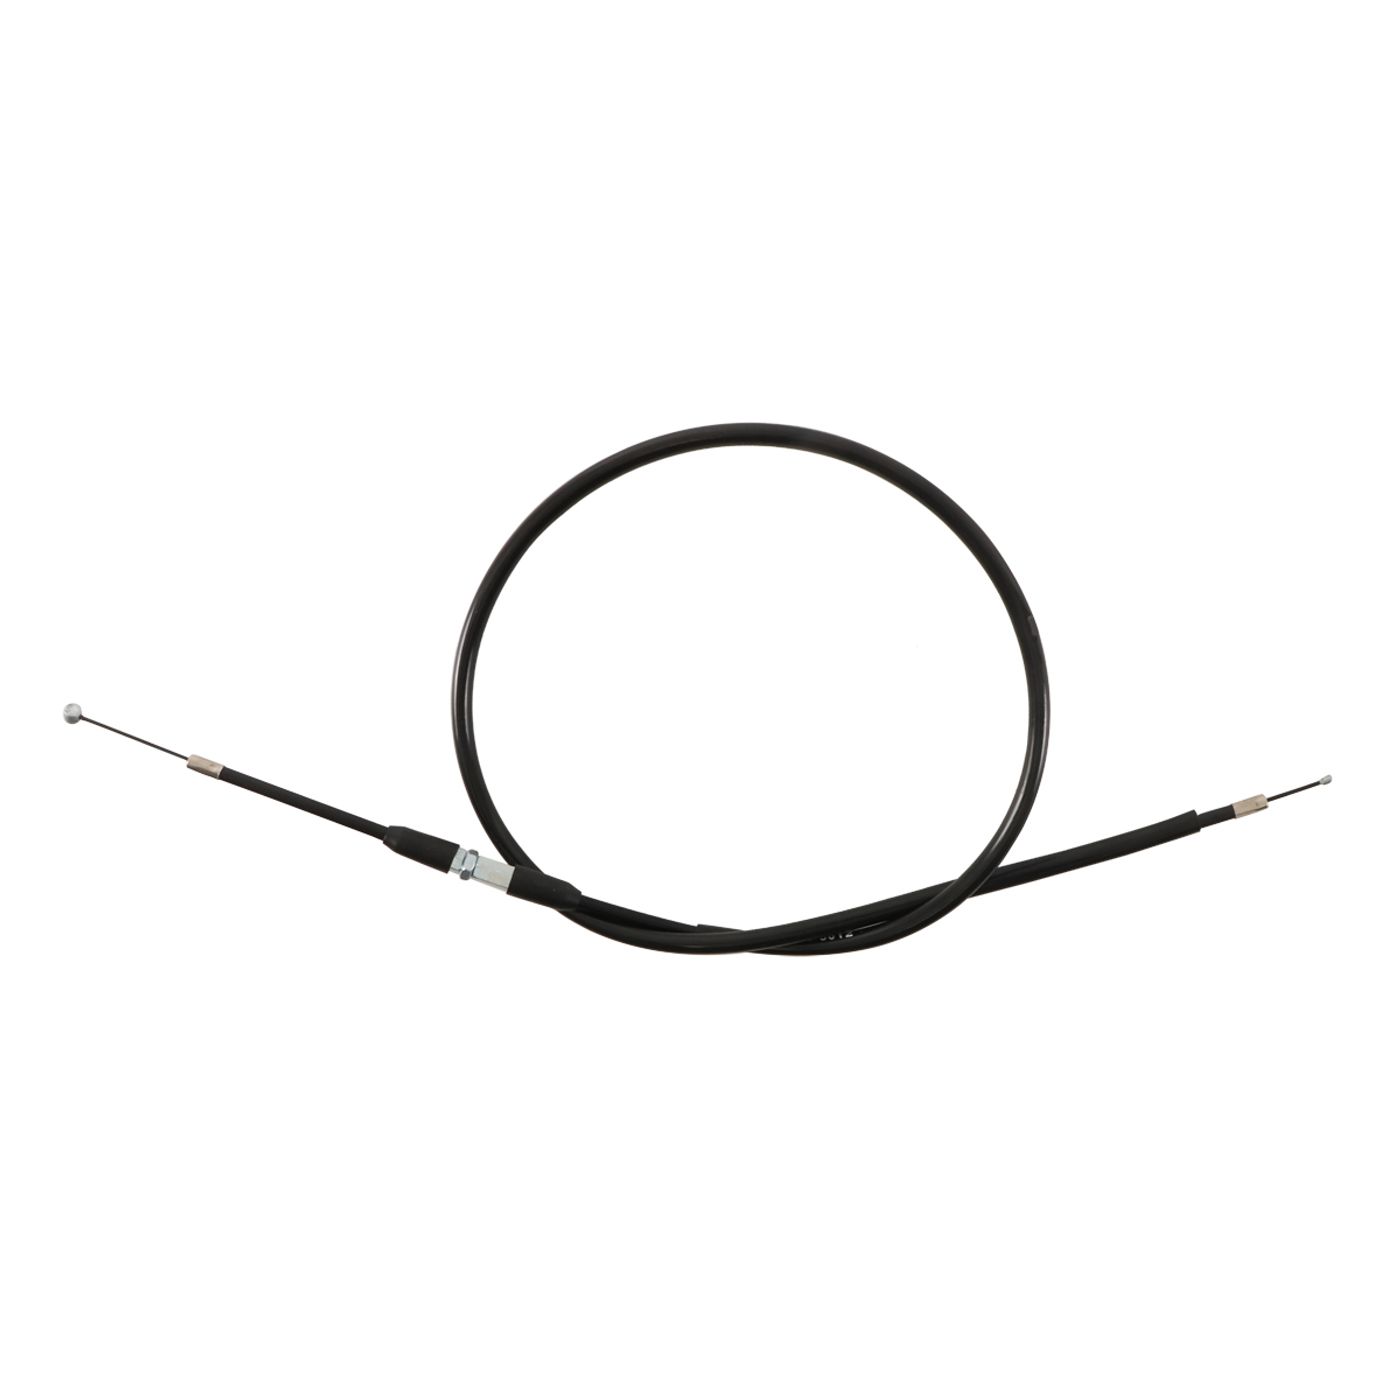 Wrp Clutch Cables - WRP453007 image